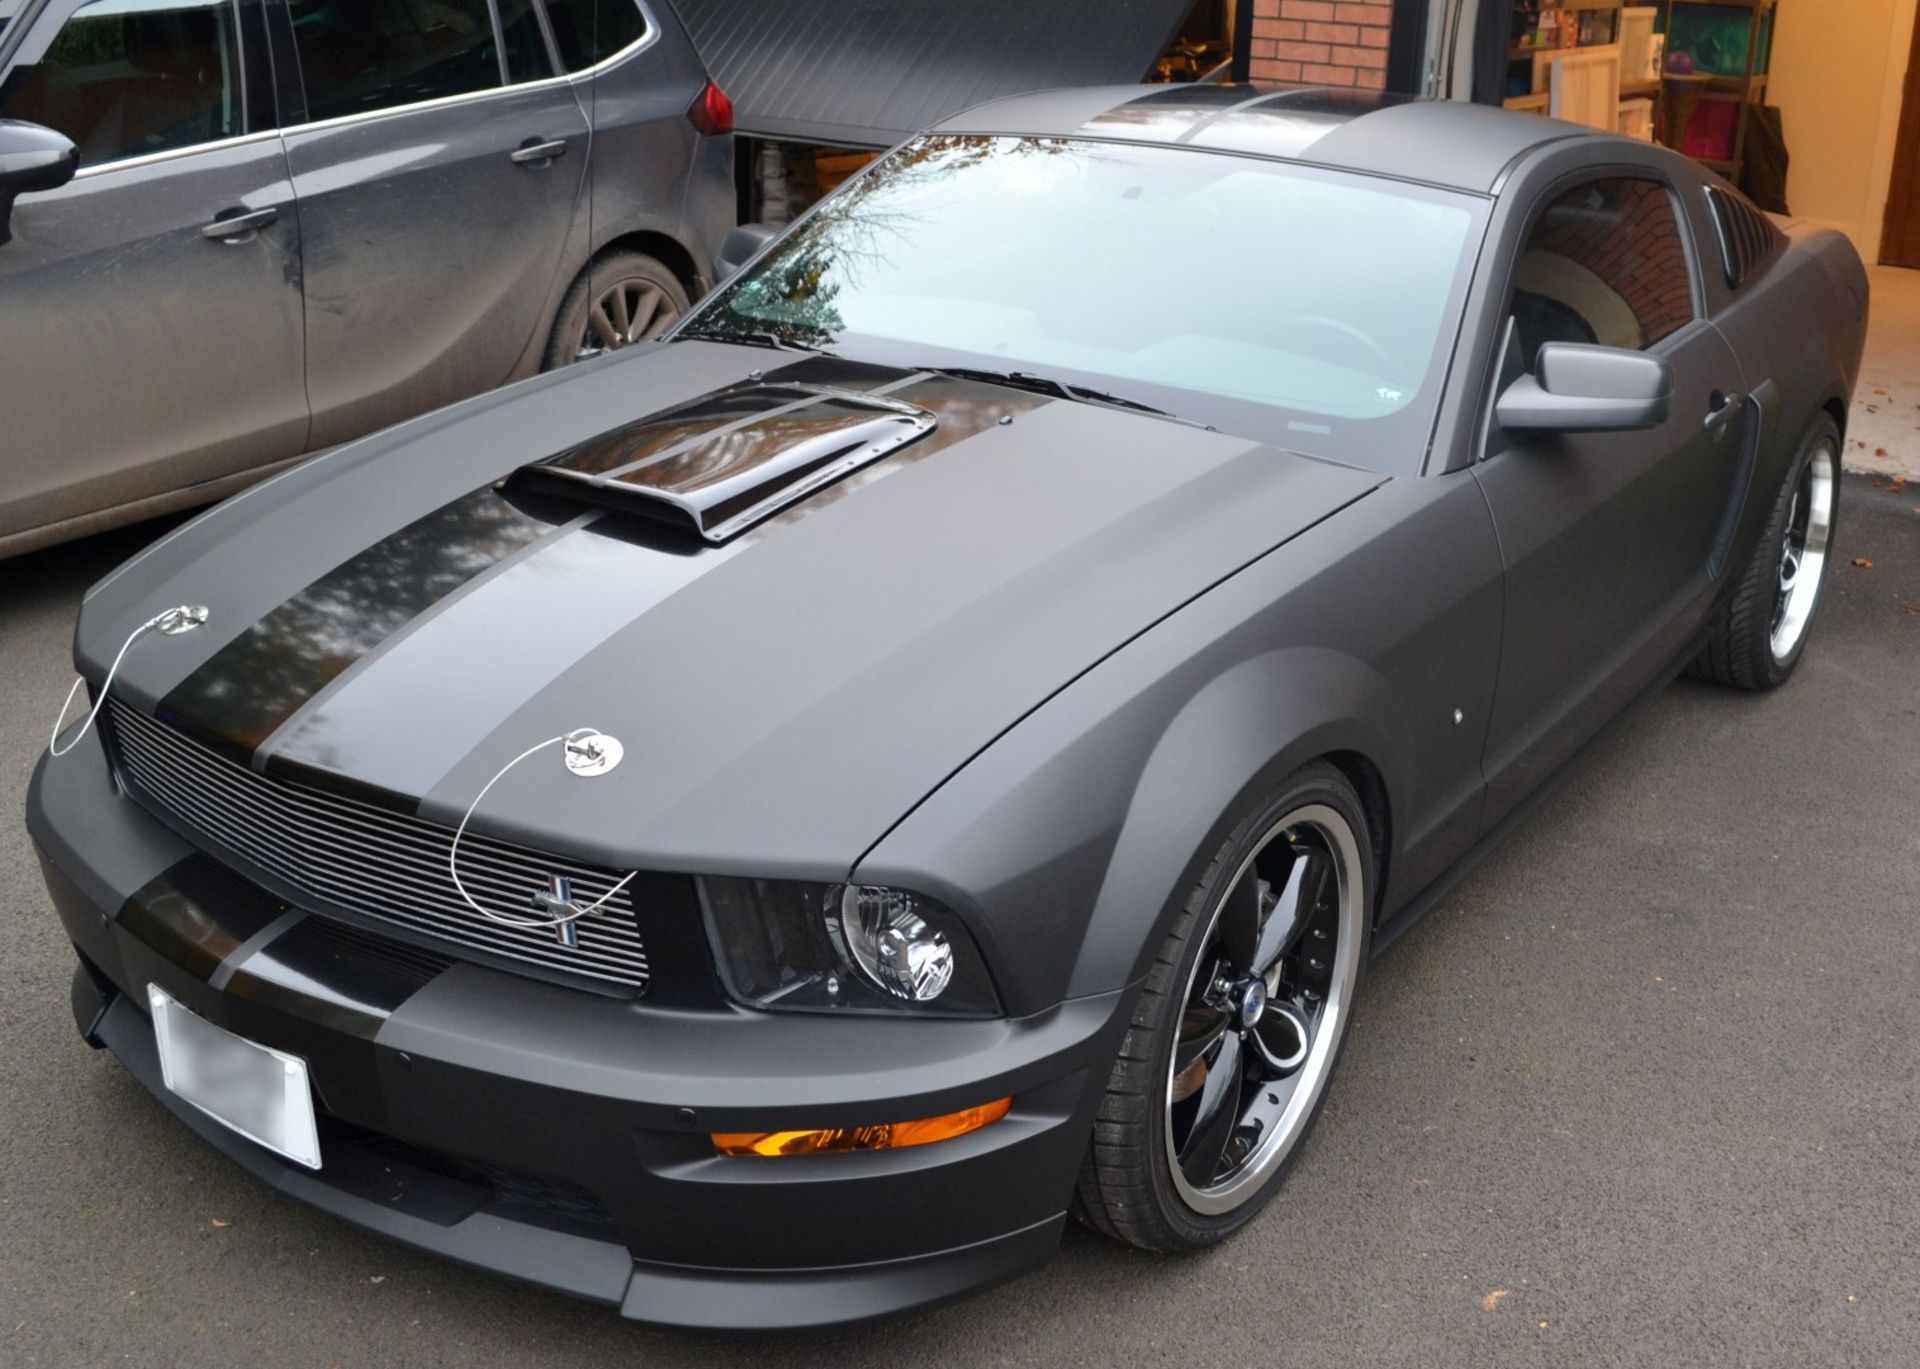 Limited Edition Supercharged 2008 Shelby Ford Mustang GT-C - 2136 Miles - No VAT on the hammer - Image 14 of 64